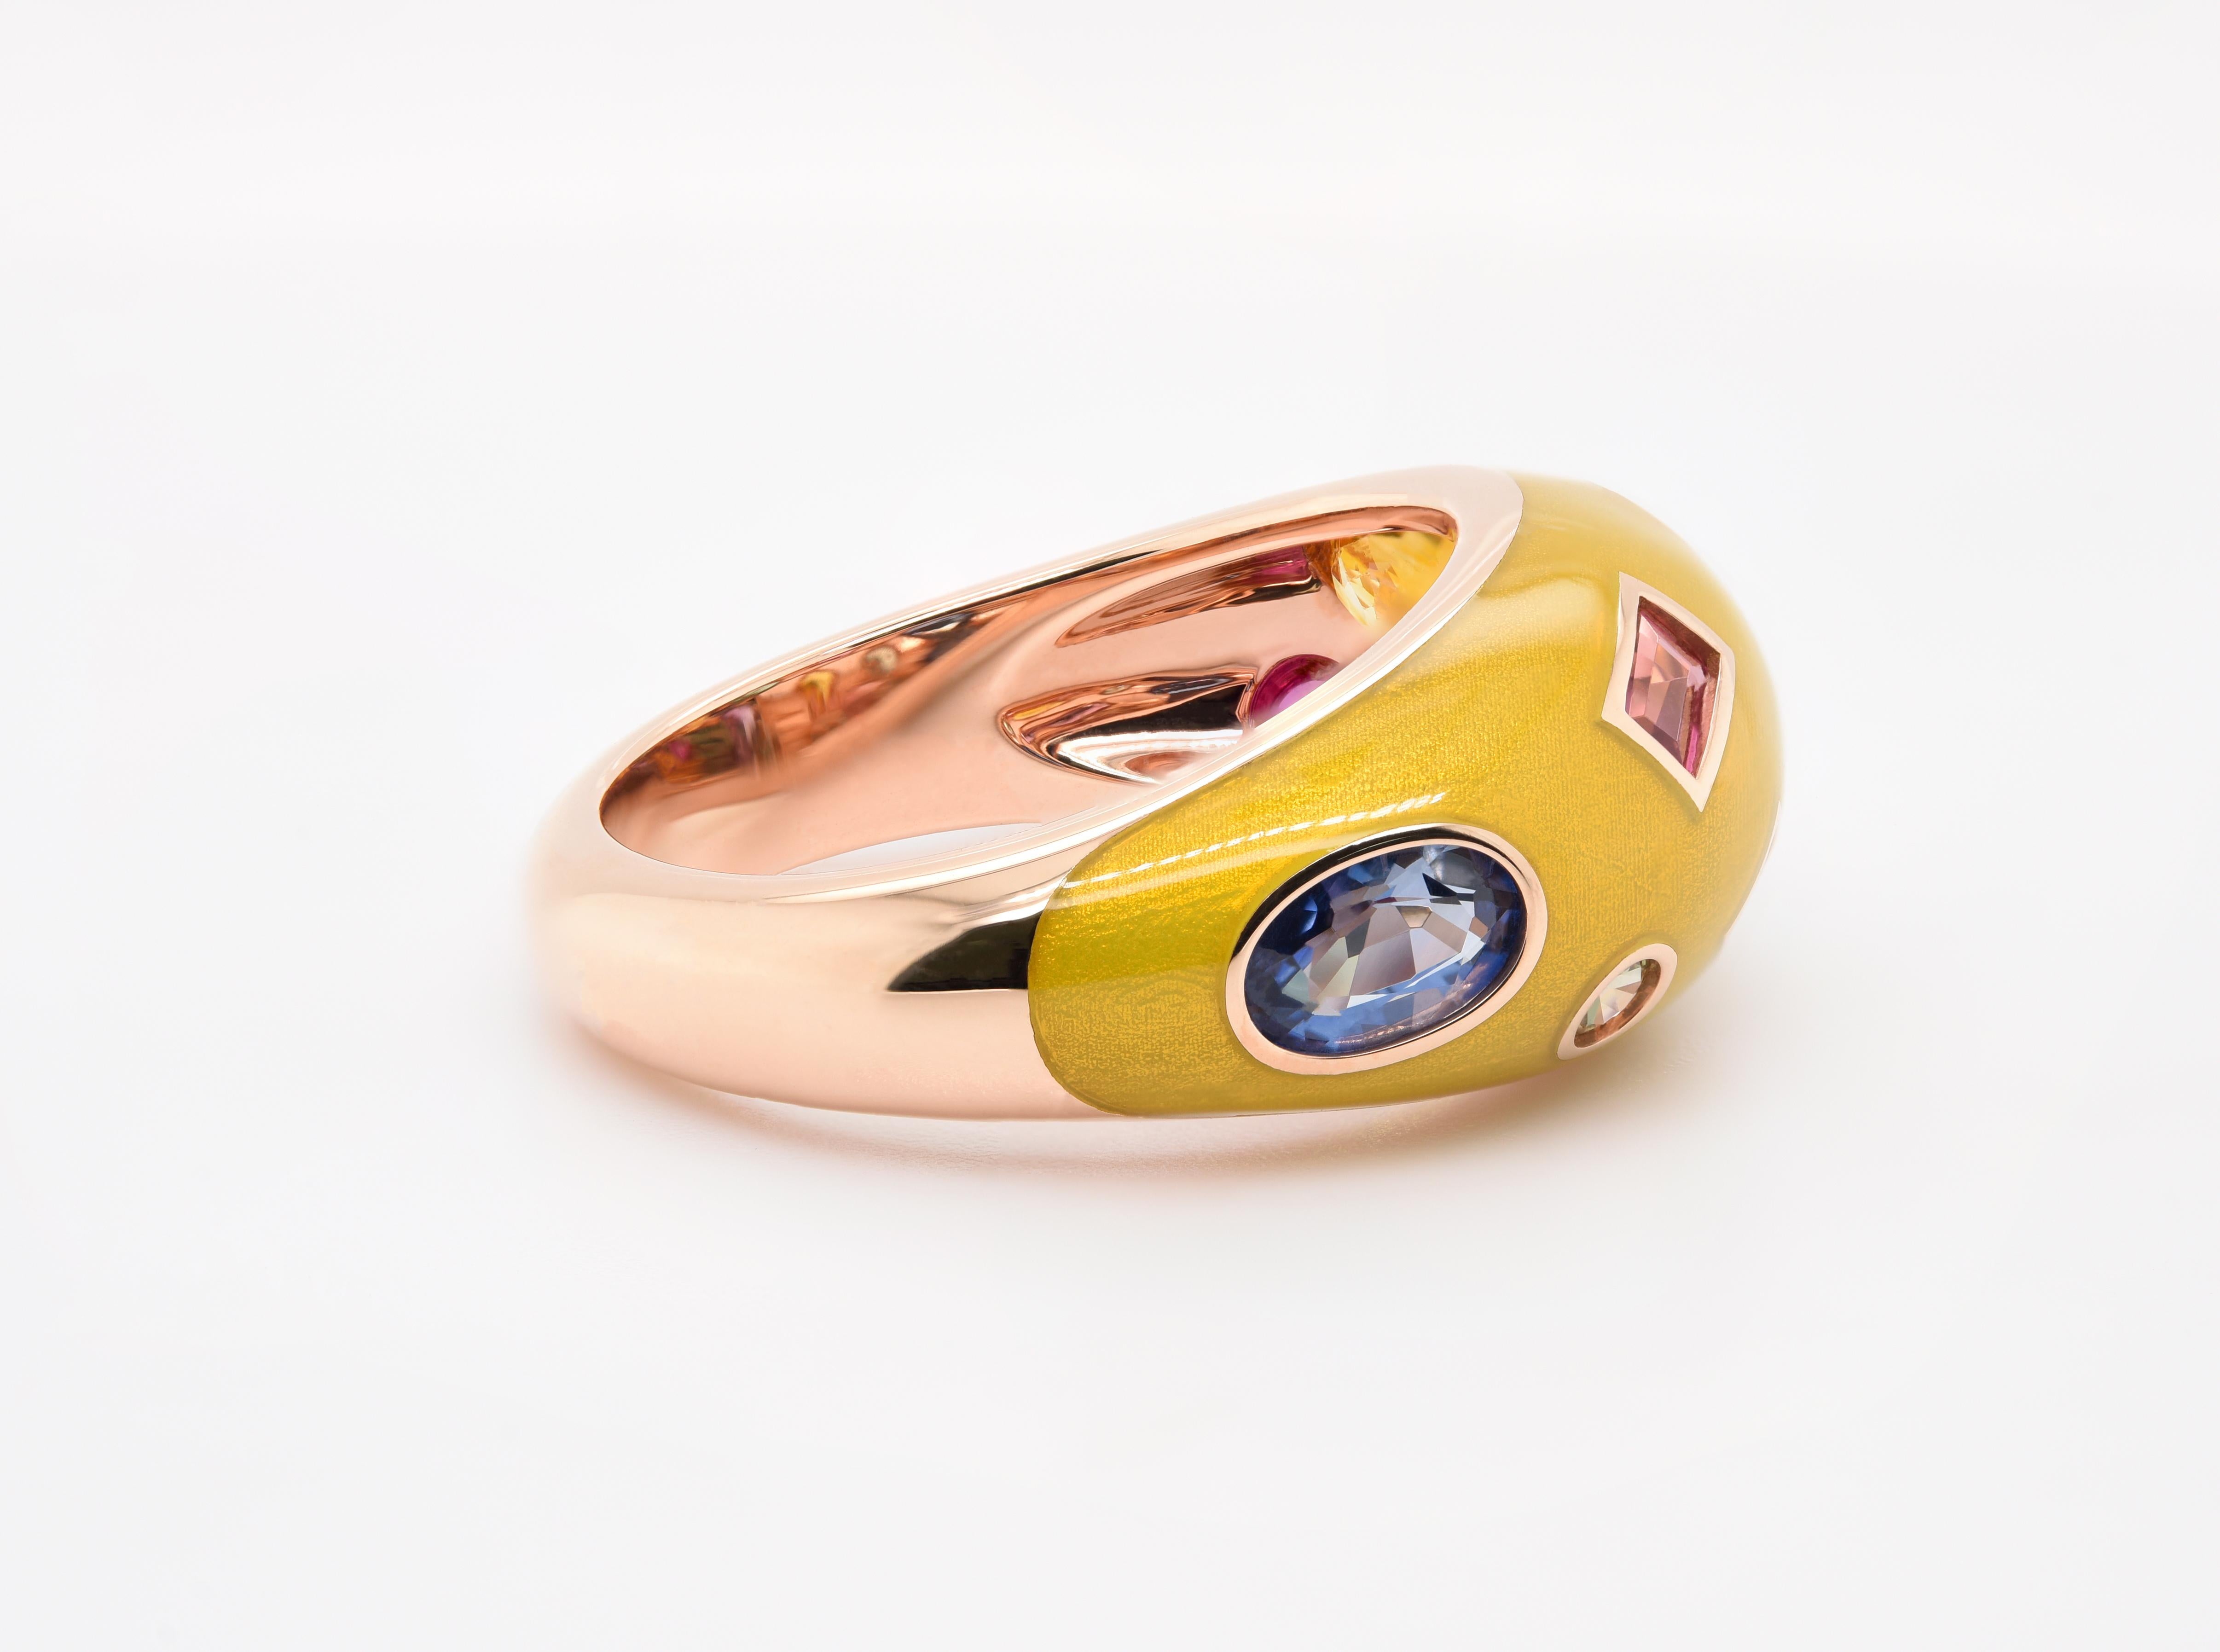 Artisan JAG New York 18 Karat Gold Dome Ring with Sapphires, Tourmaline and Amethyst For Sale